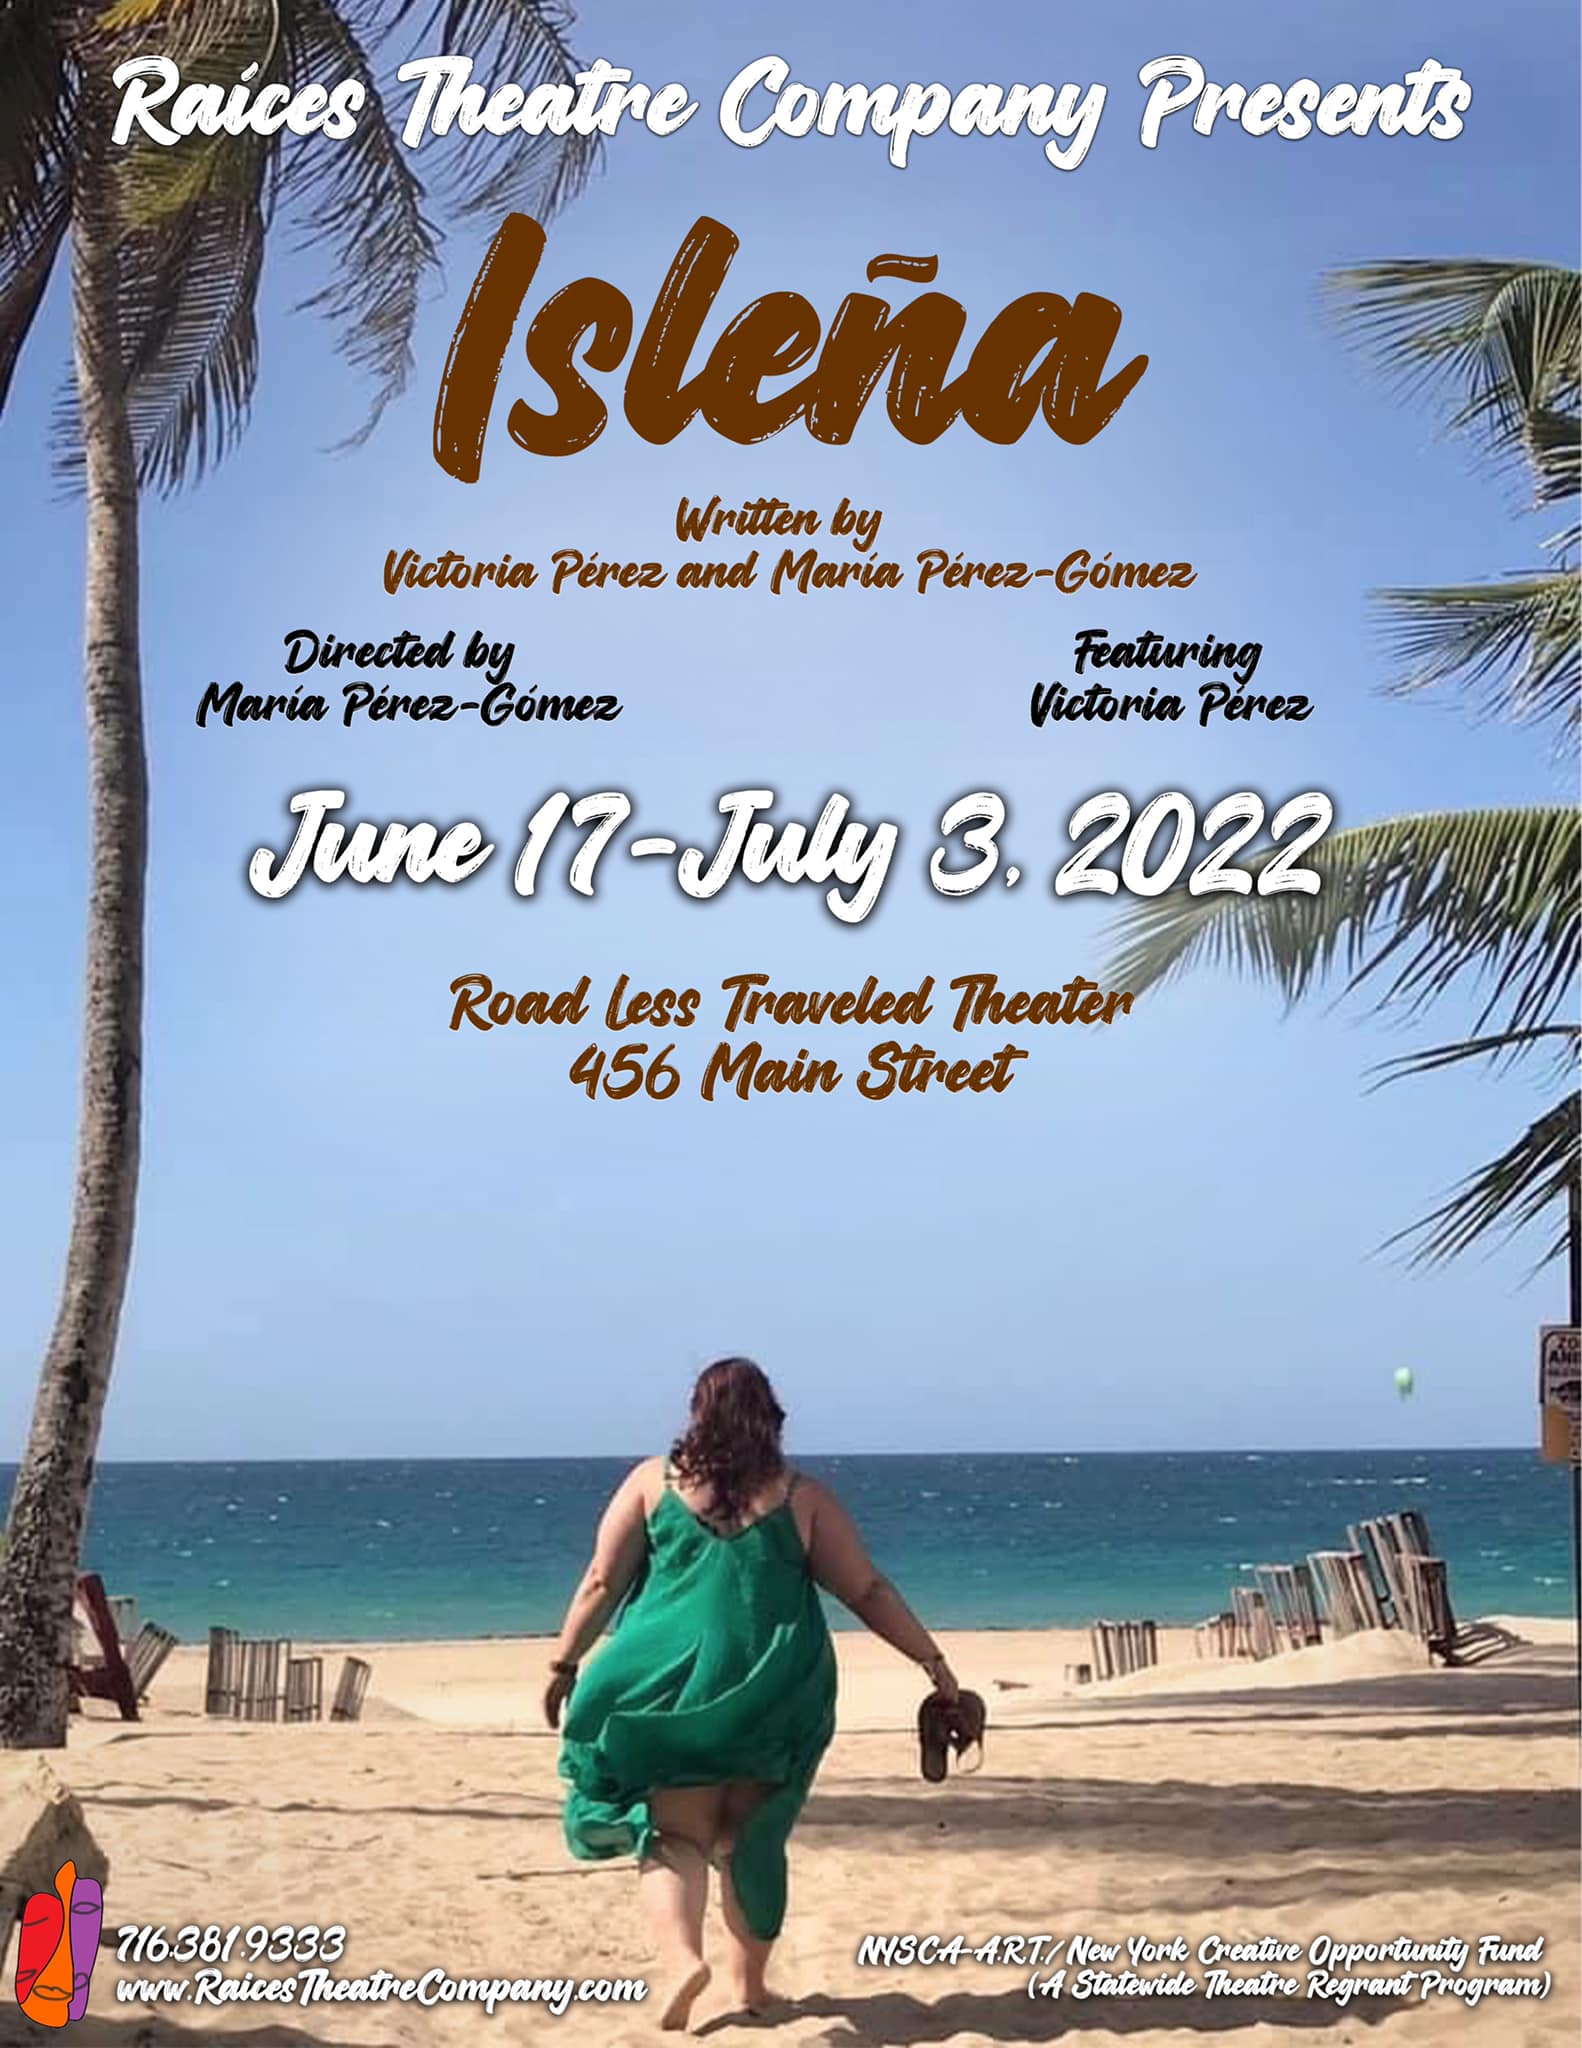 Theater Review: Isleña by Raices Theatre Company